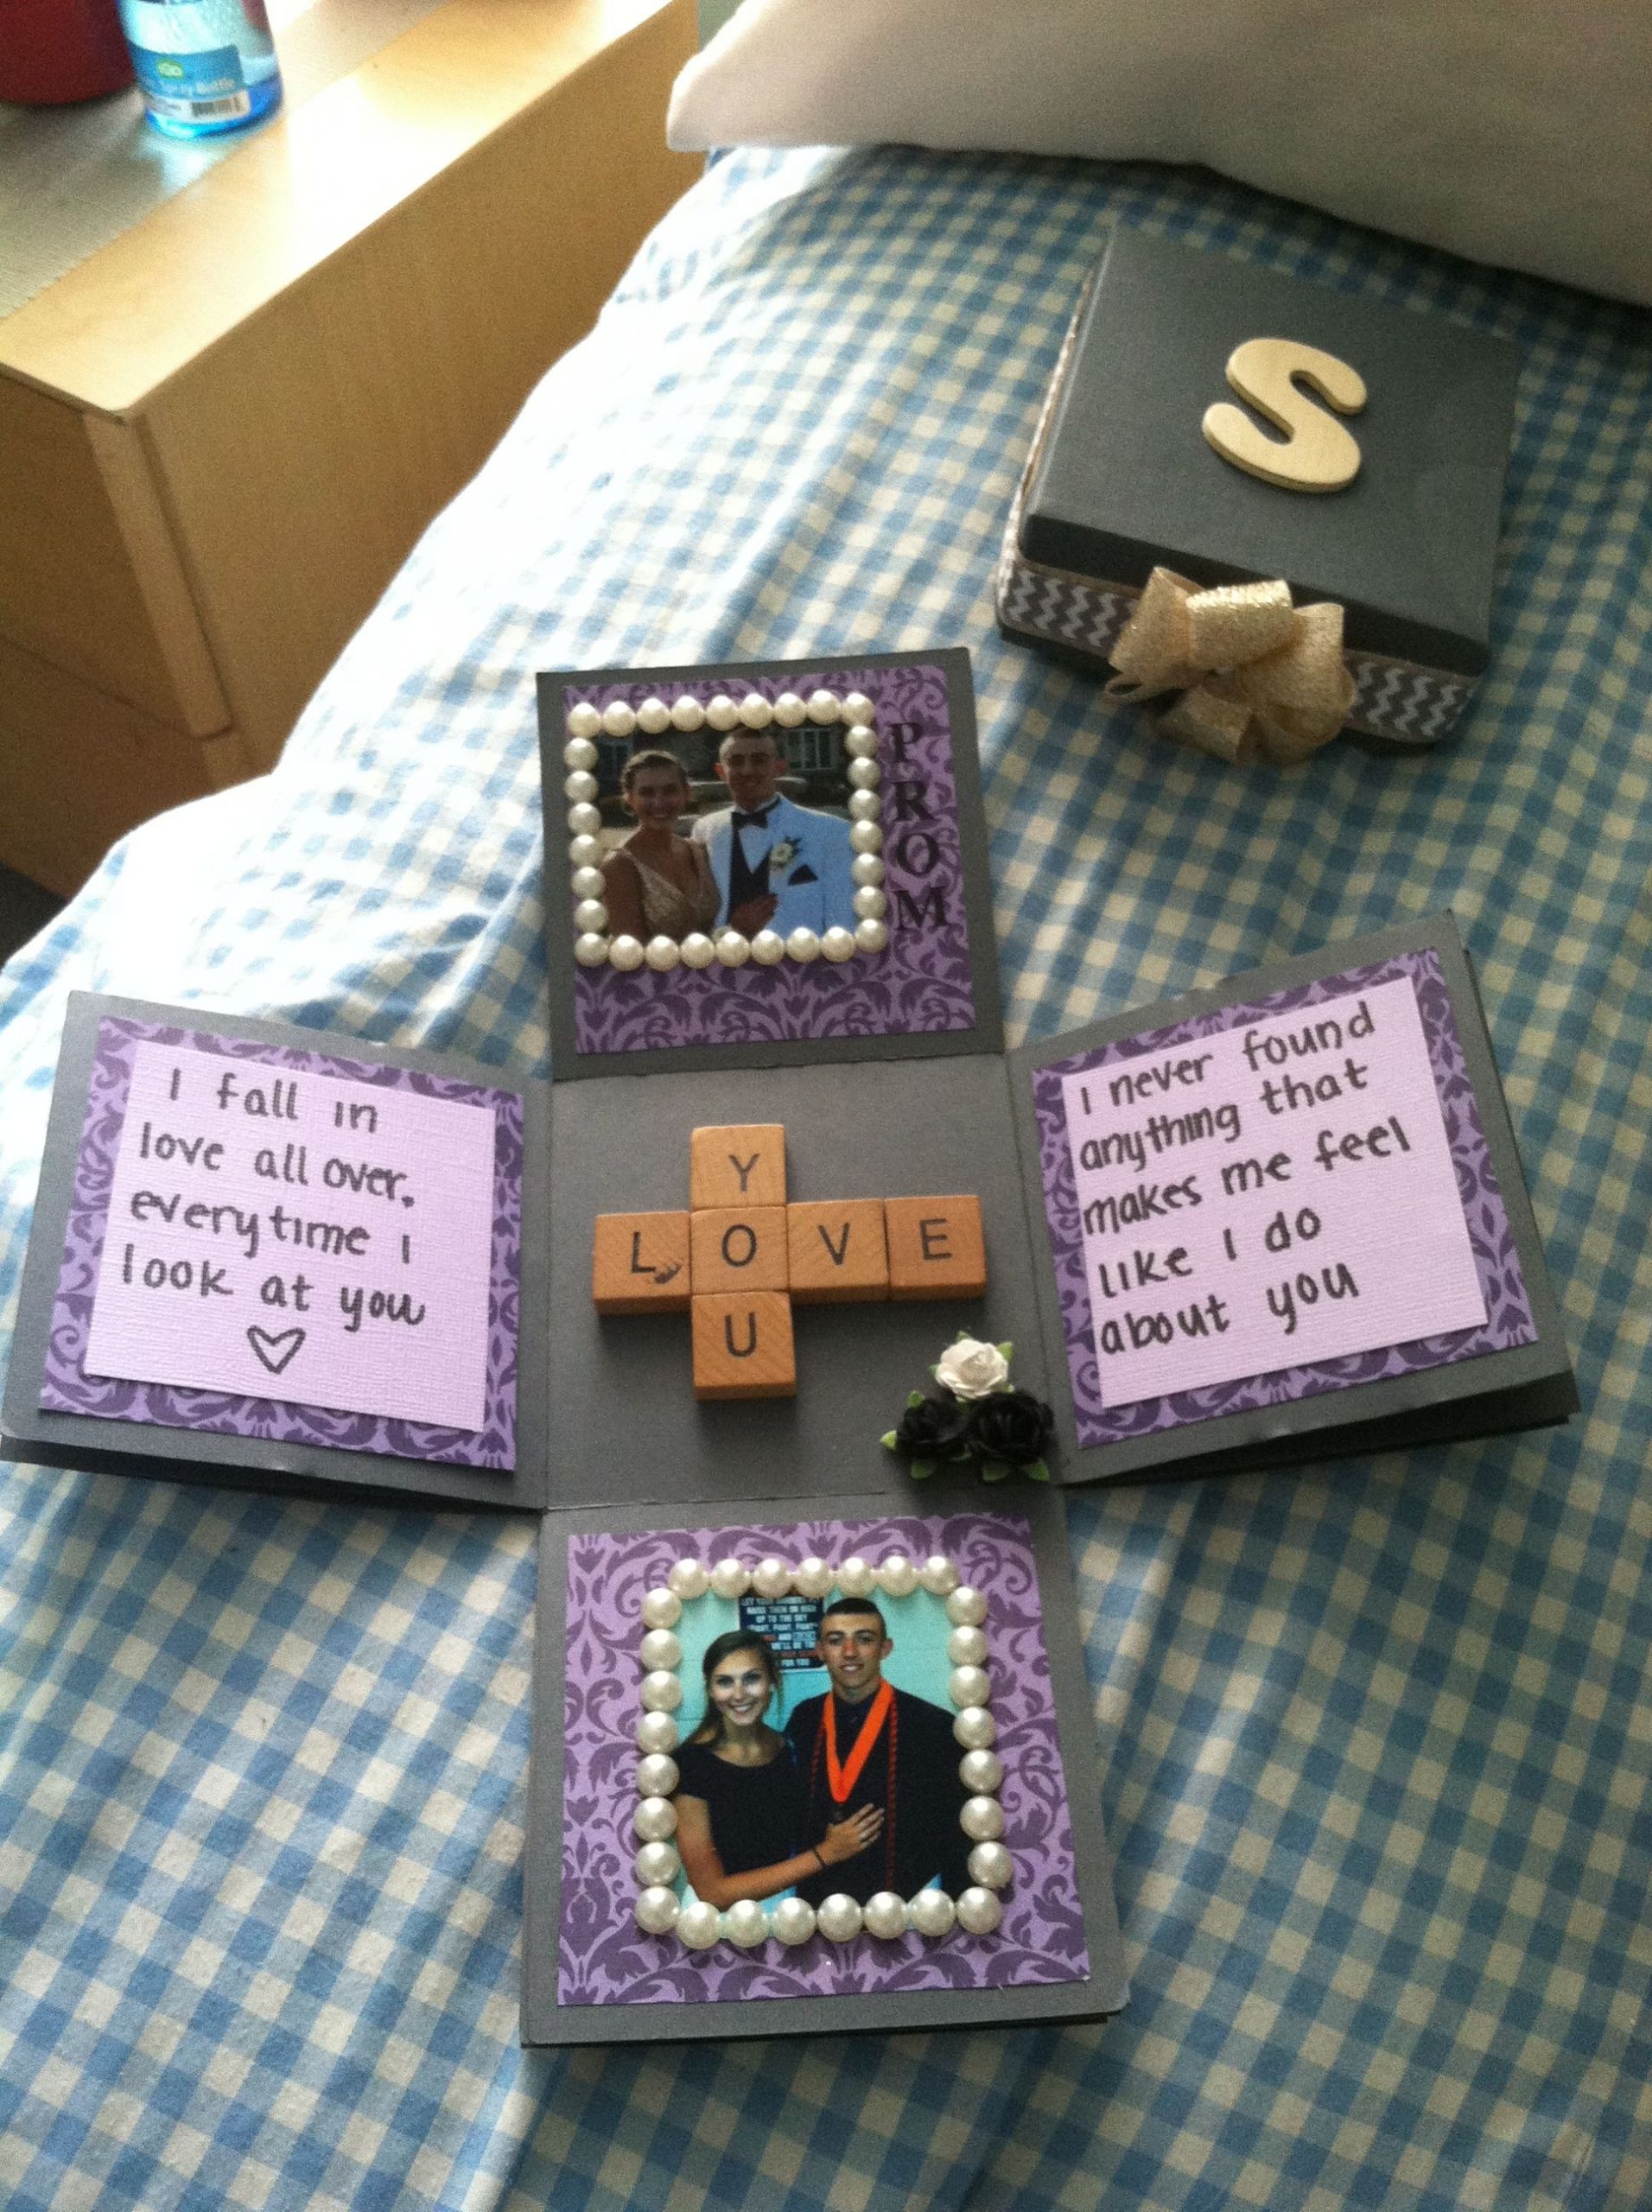 Graduation Gift Ideas For Your Boyfriend
 Exploding box of love I made for the boyfriend for a